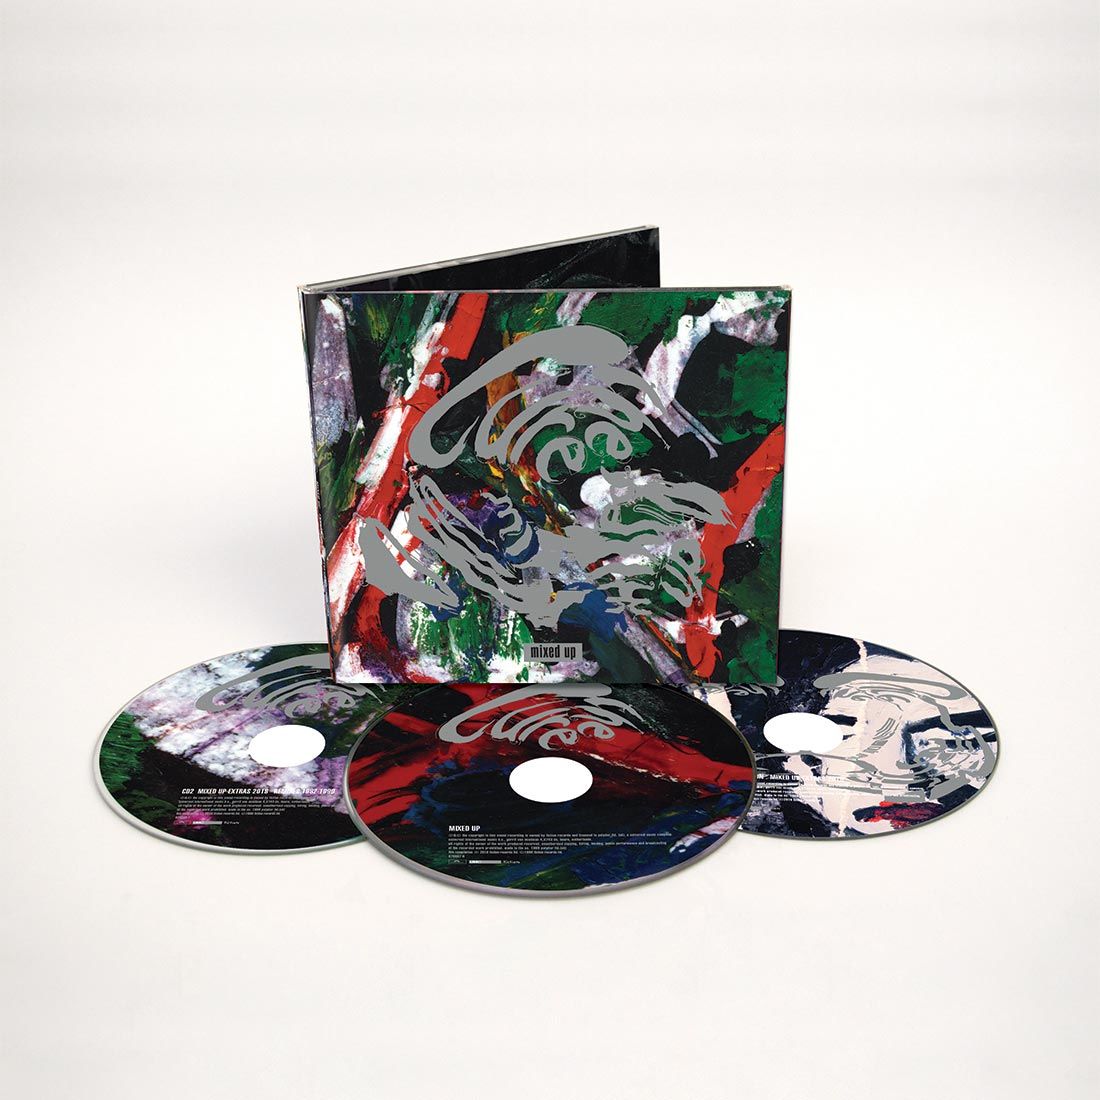 The Cure  - Mixed Up: Deluxe CD